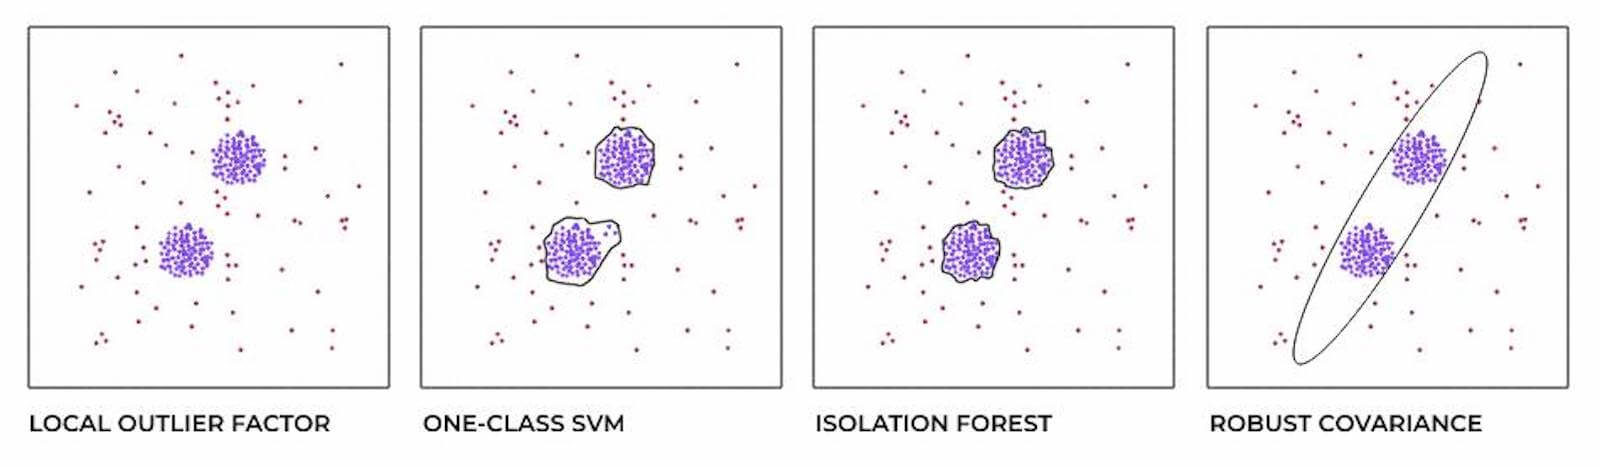 Four boxes showing images depicting different anomaly detection algorithms: local outlier factor, one-class SVM, isolation forest, and robust covariance.